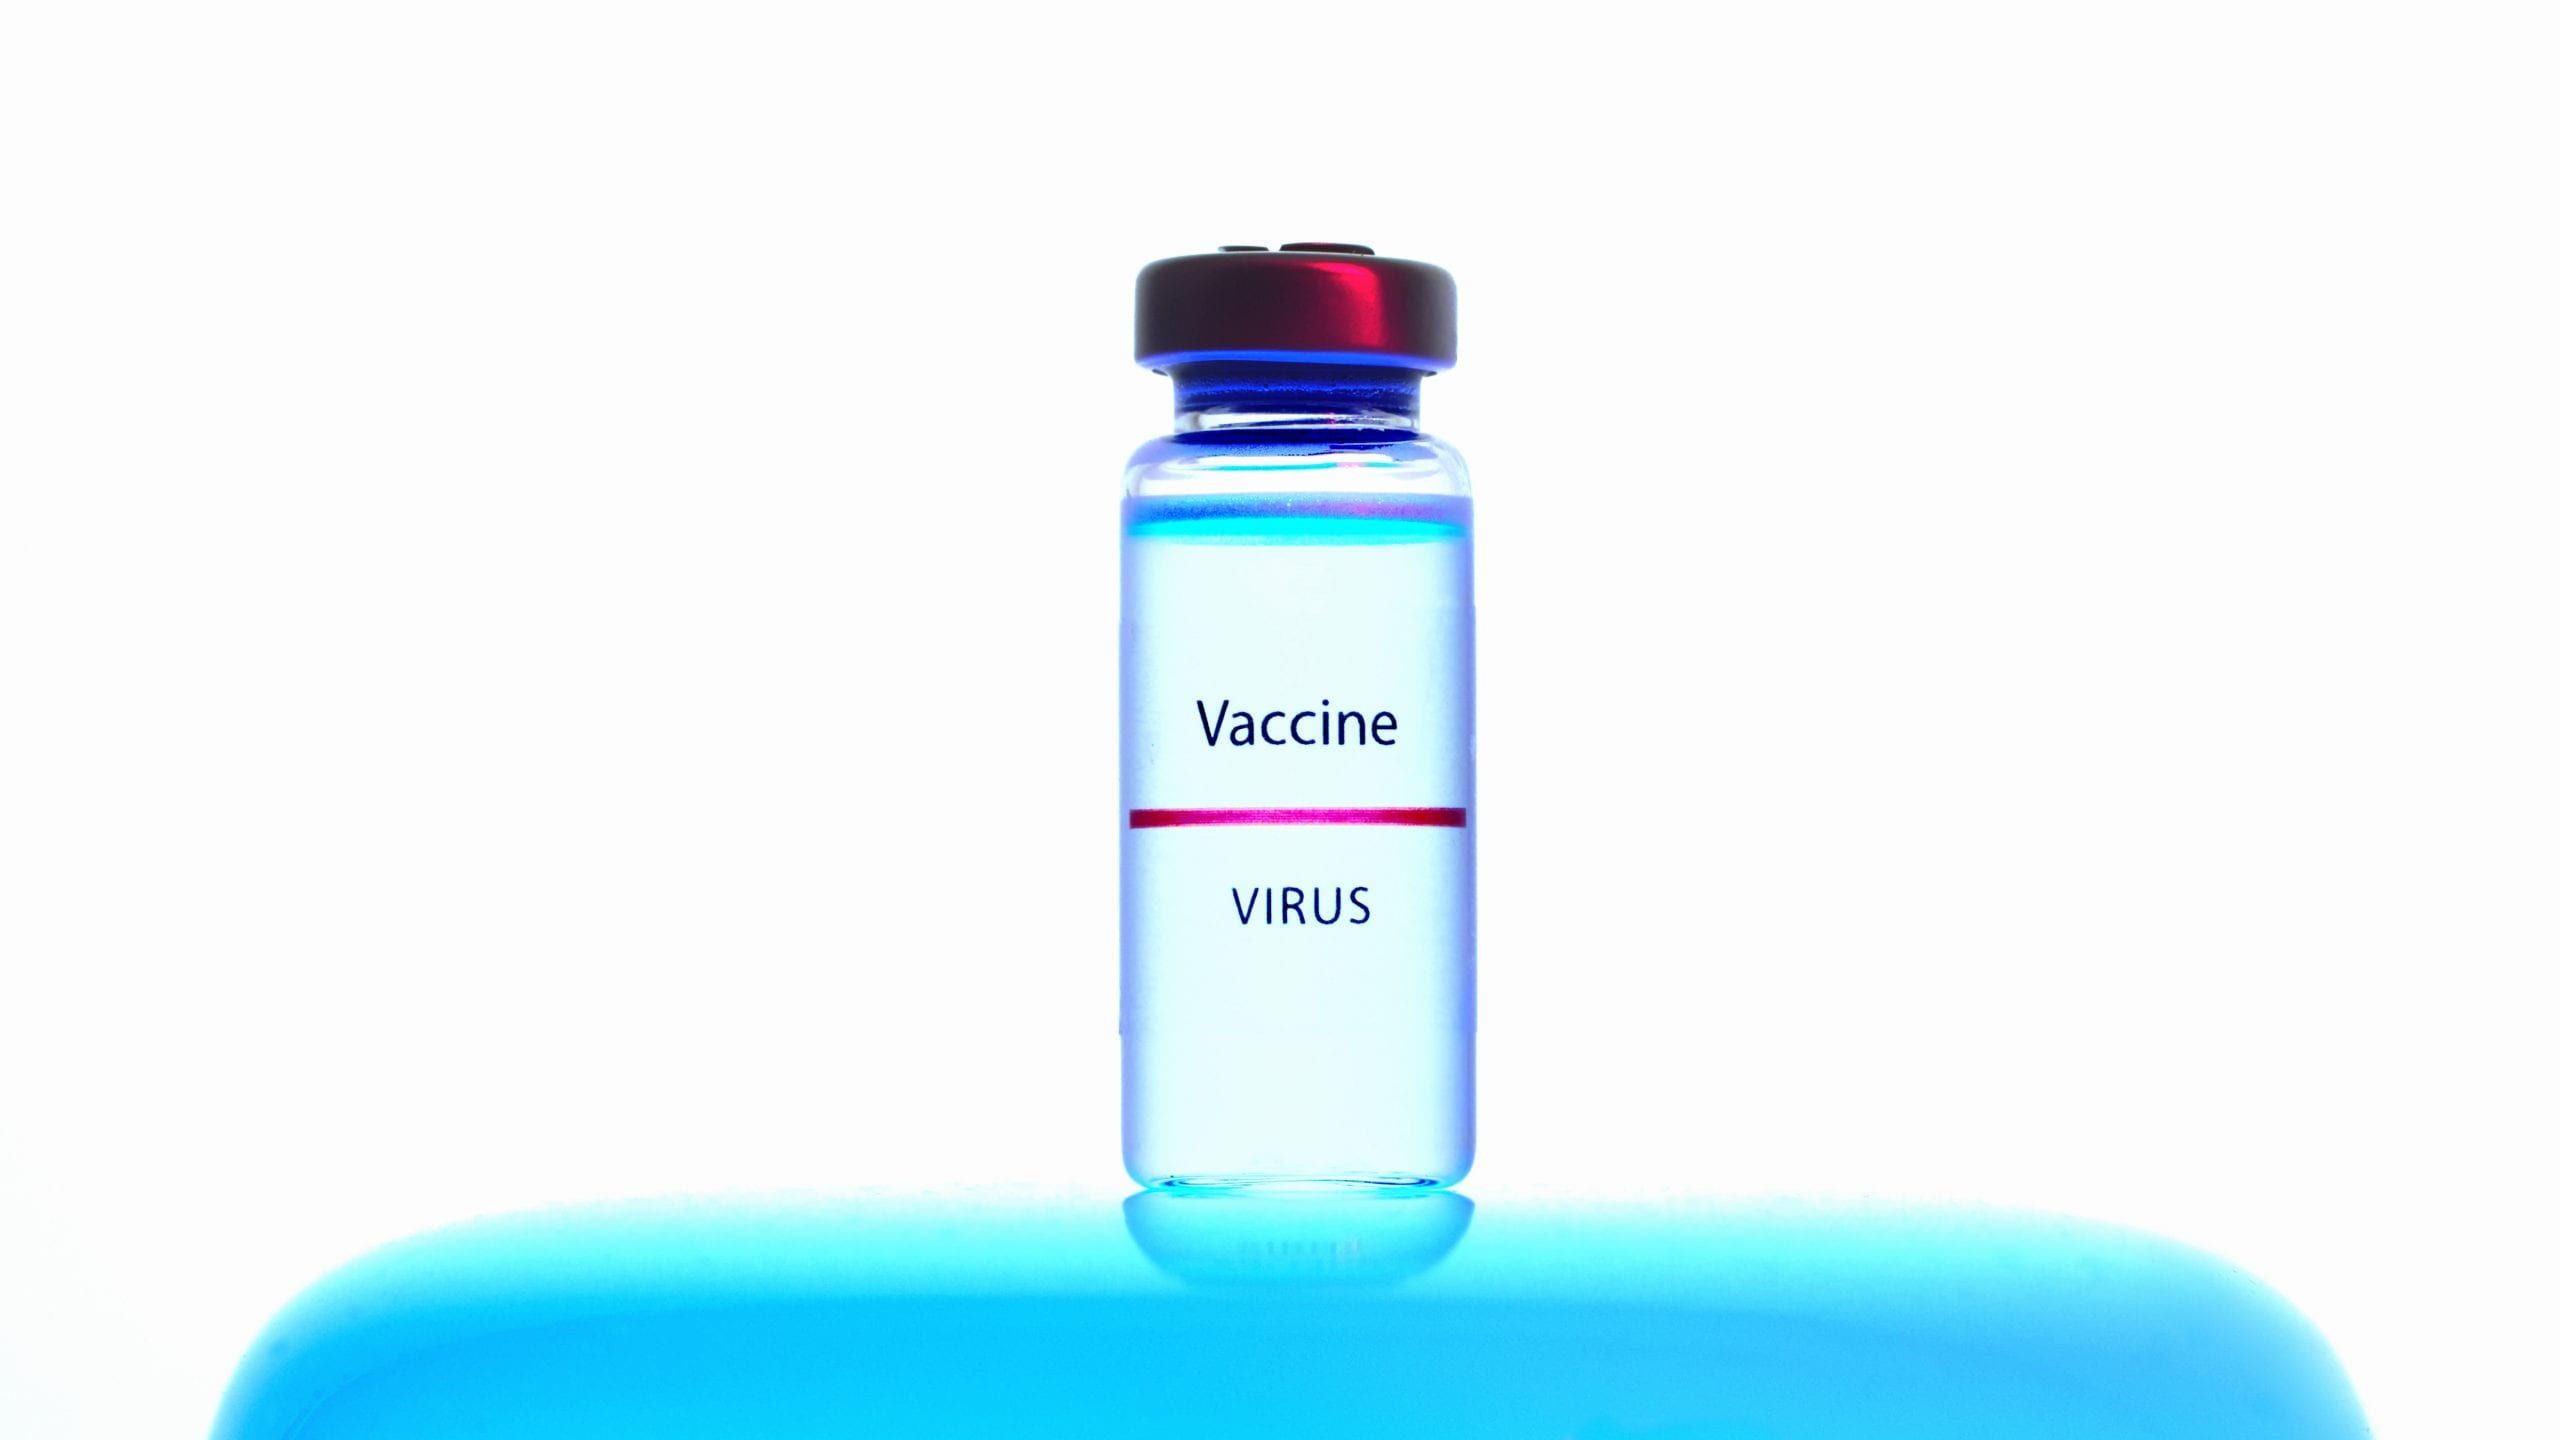 More than 3.39 billion doses of coronavirus vaccines have been administered worldwide